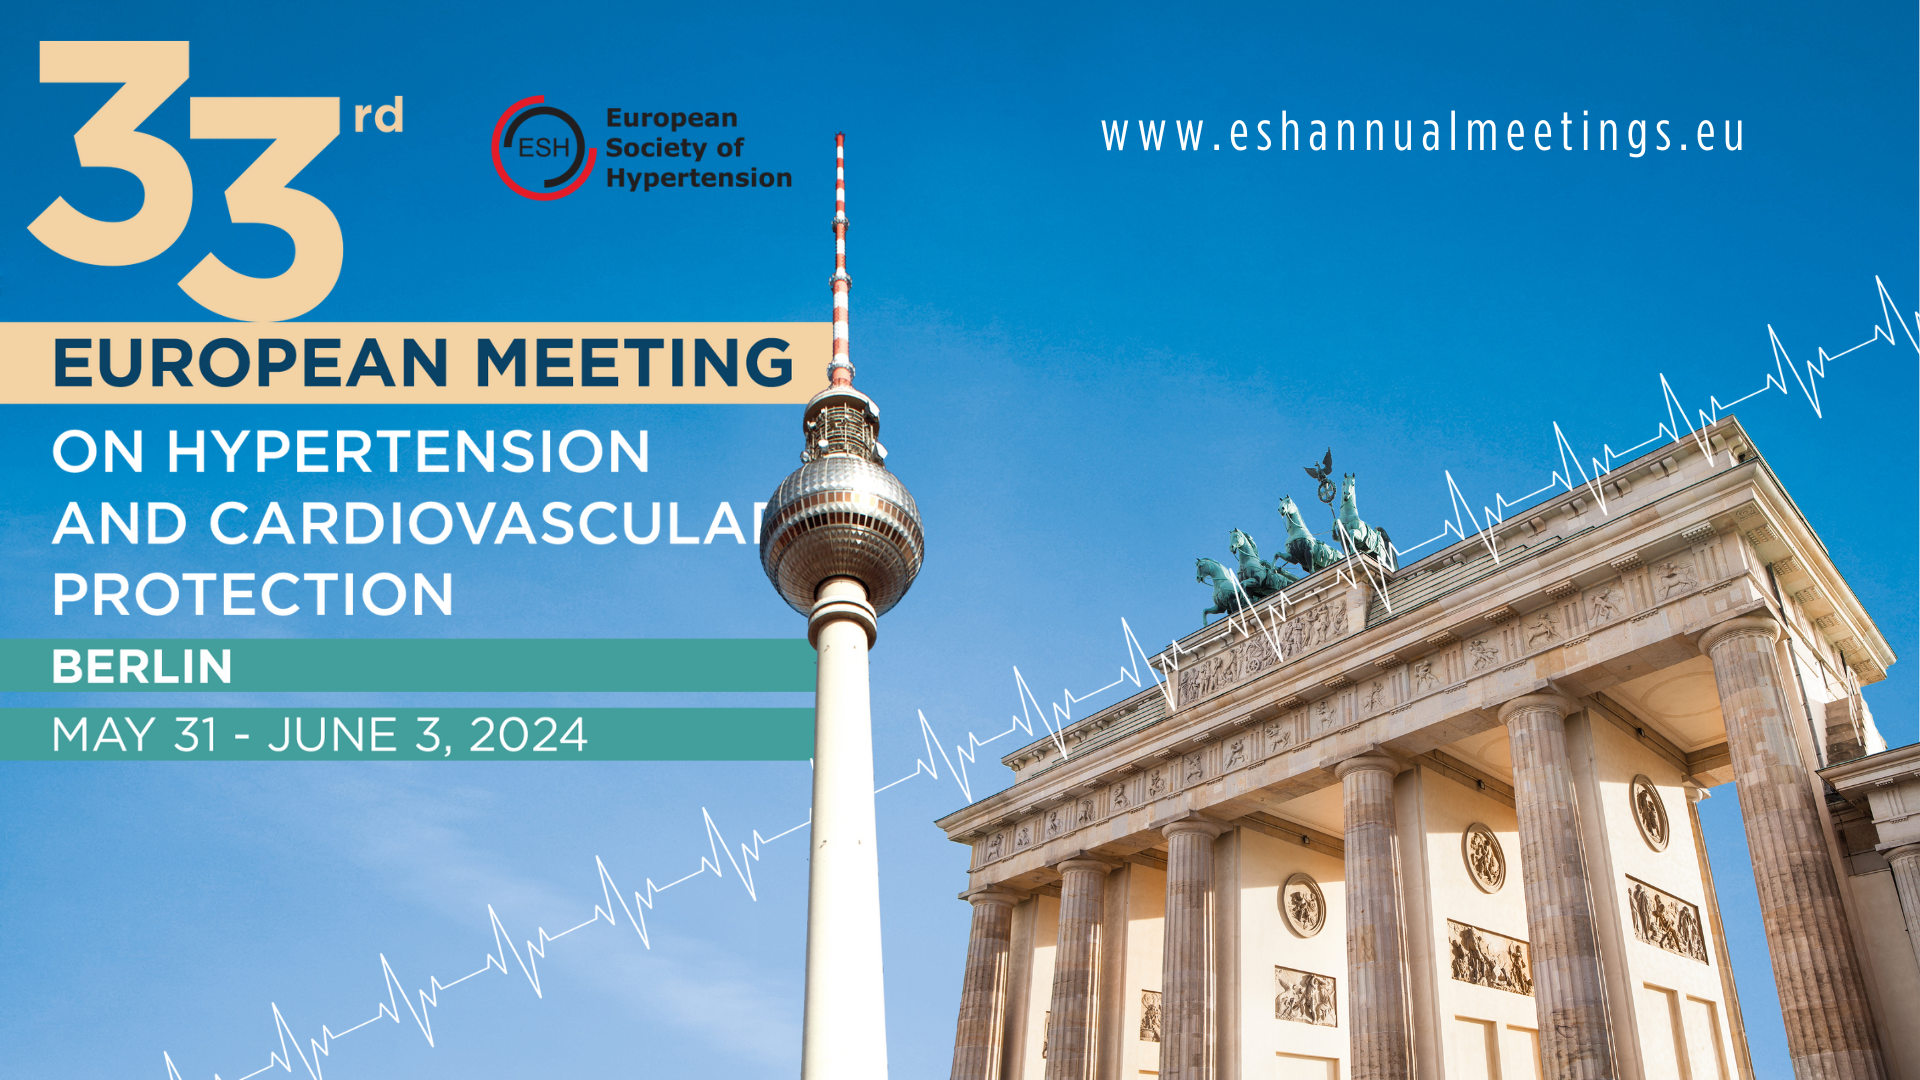 33rd European Meeting on Hypertension and Cardiovascular Protection | Berlin | May 31- June1, 2024